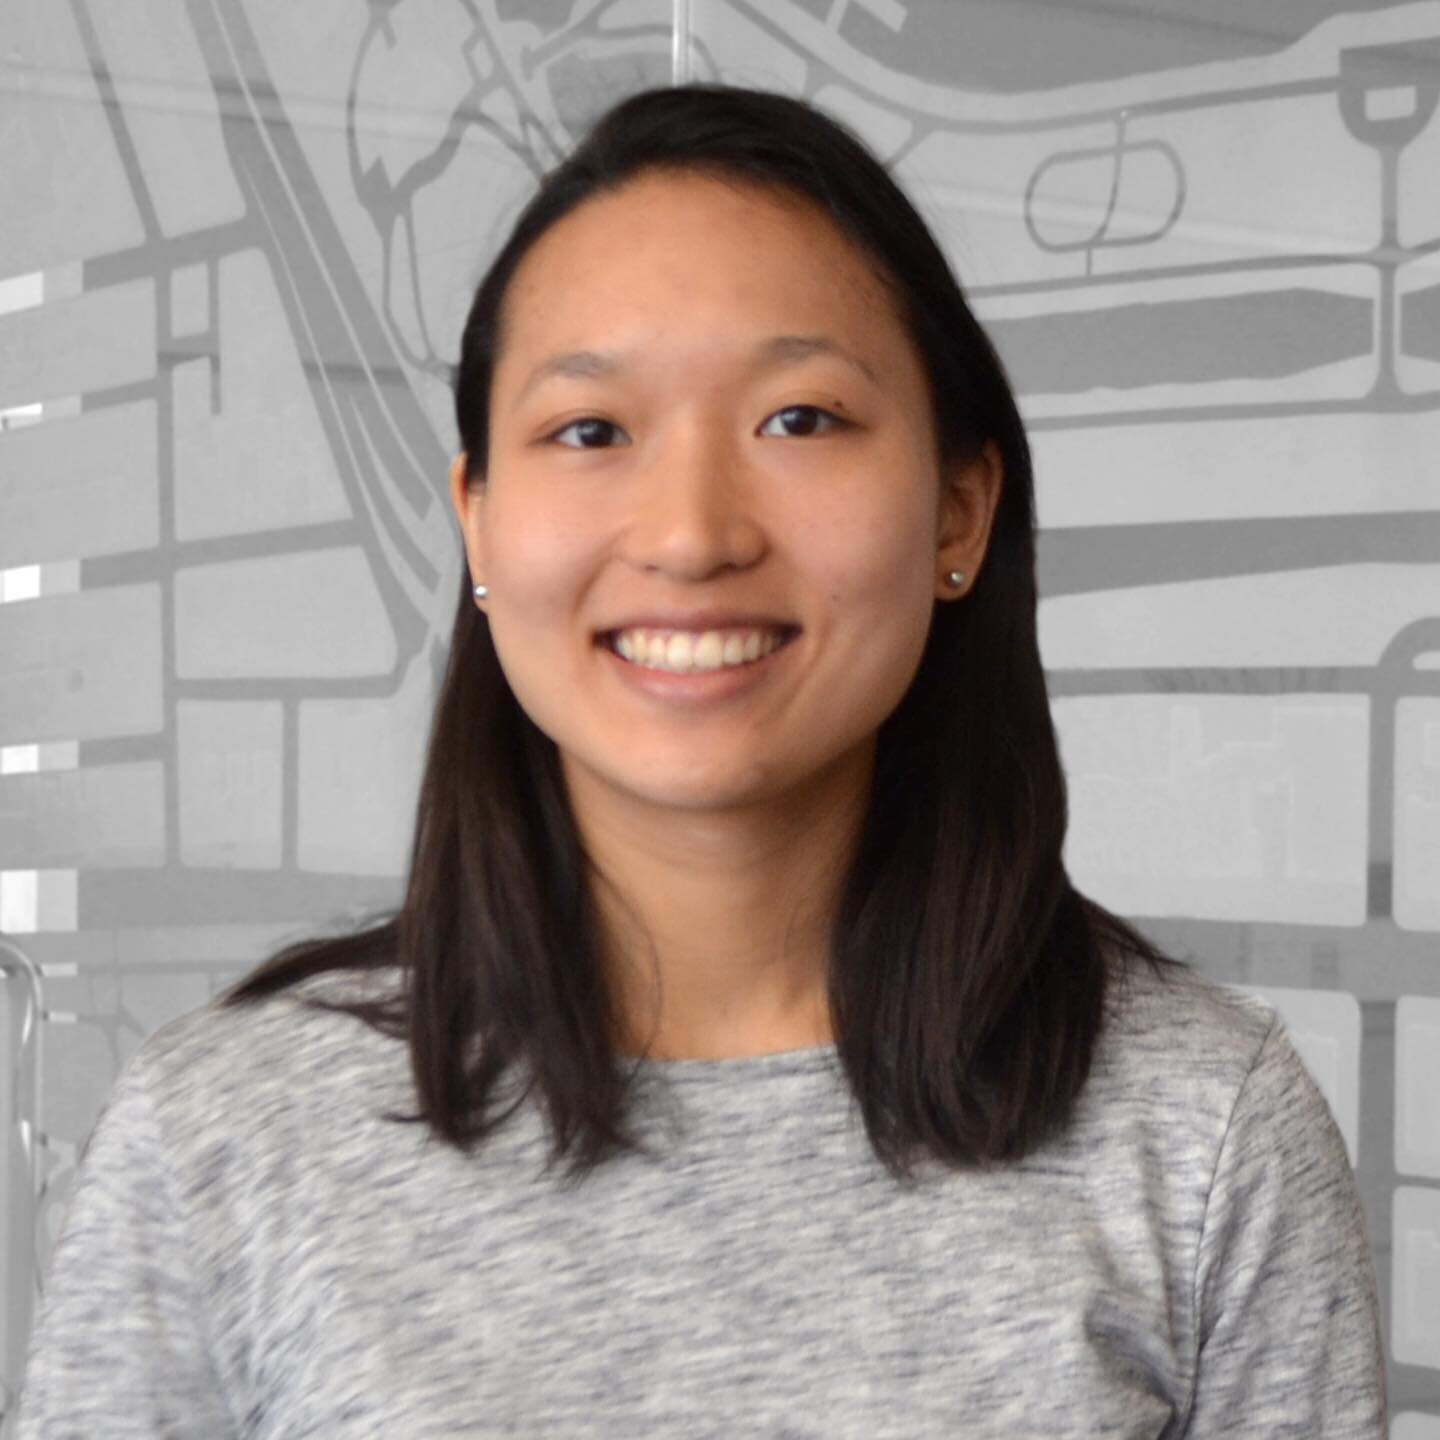 ALUMNI PROFILE: Olivia Huang, M.Arch 2018, Architect

What is your name, current location, and current occupation?
Olivia Huang; Boston, MA; Architect

What was your affiliation with MIT?
M.Arch 2018

What was your thesis title?
Spaces of Justice (co